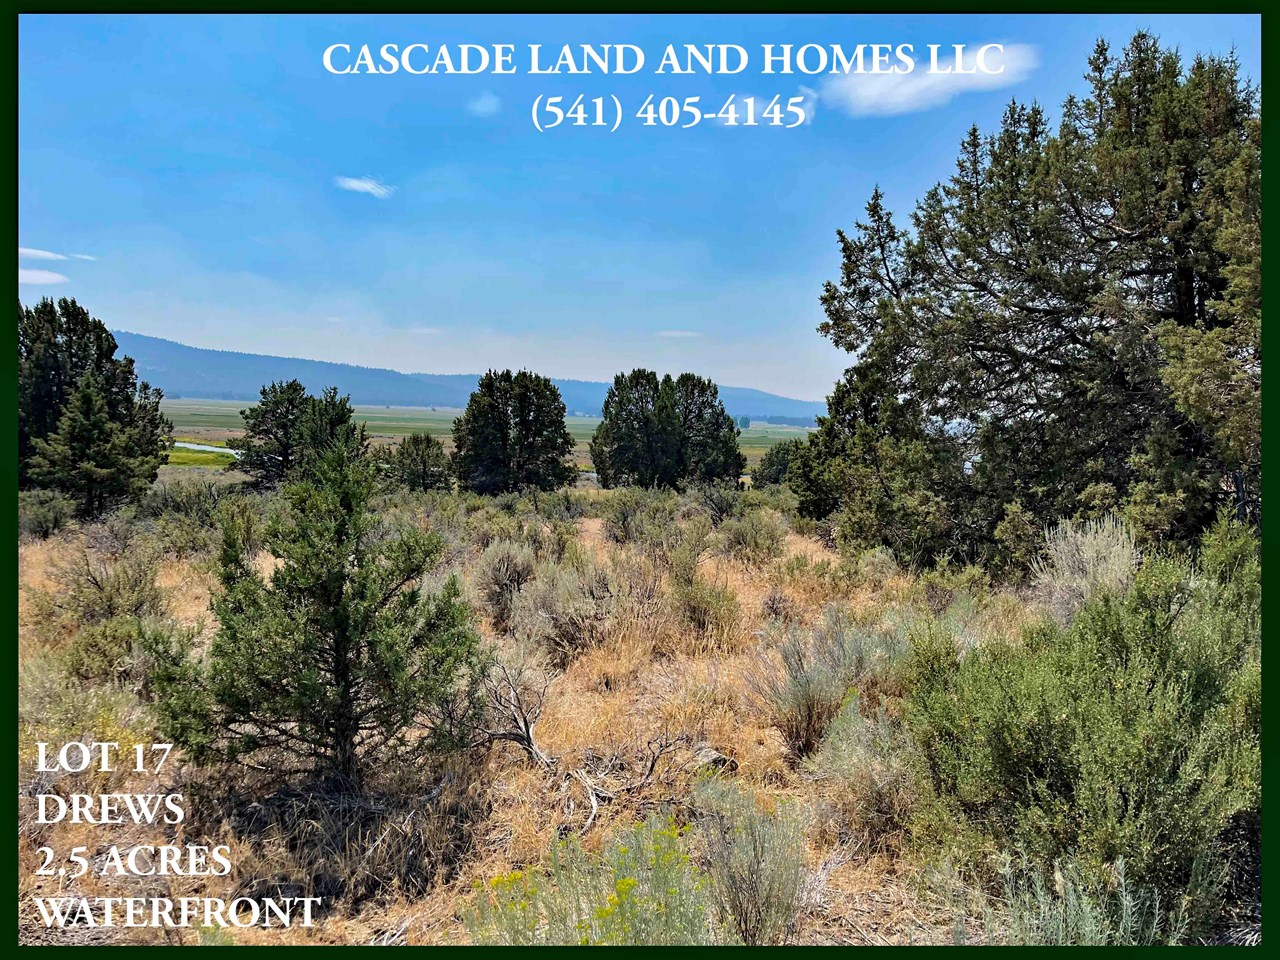 a two-story home here, up on top of the sloping property would give you gorgeous view all around! the sprague river valley and surrounding foothills are absolutely beautiful.